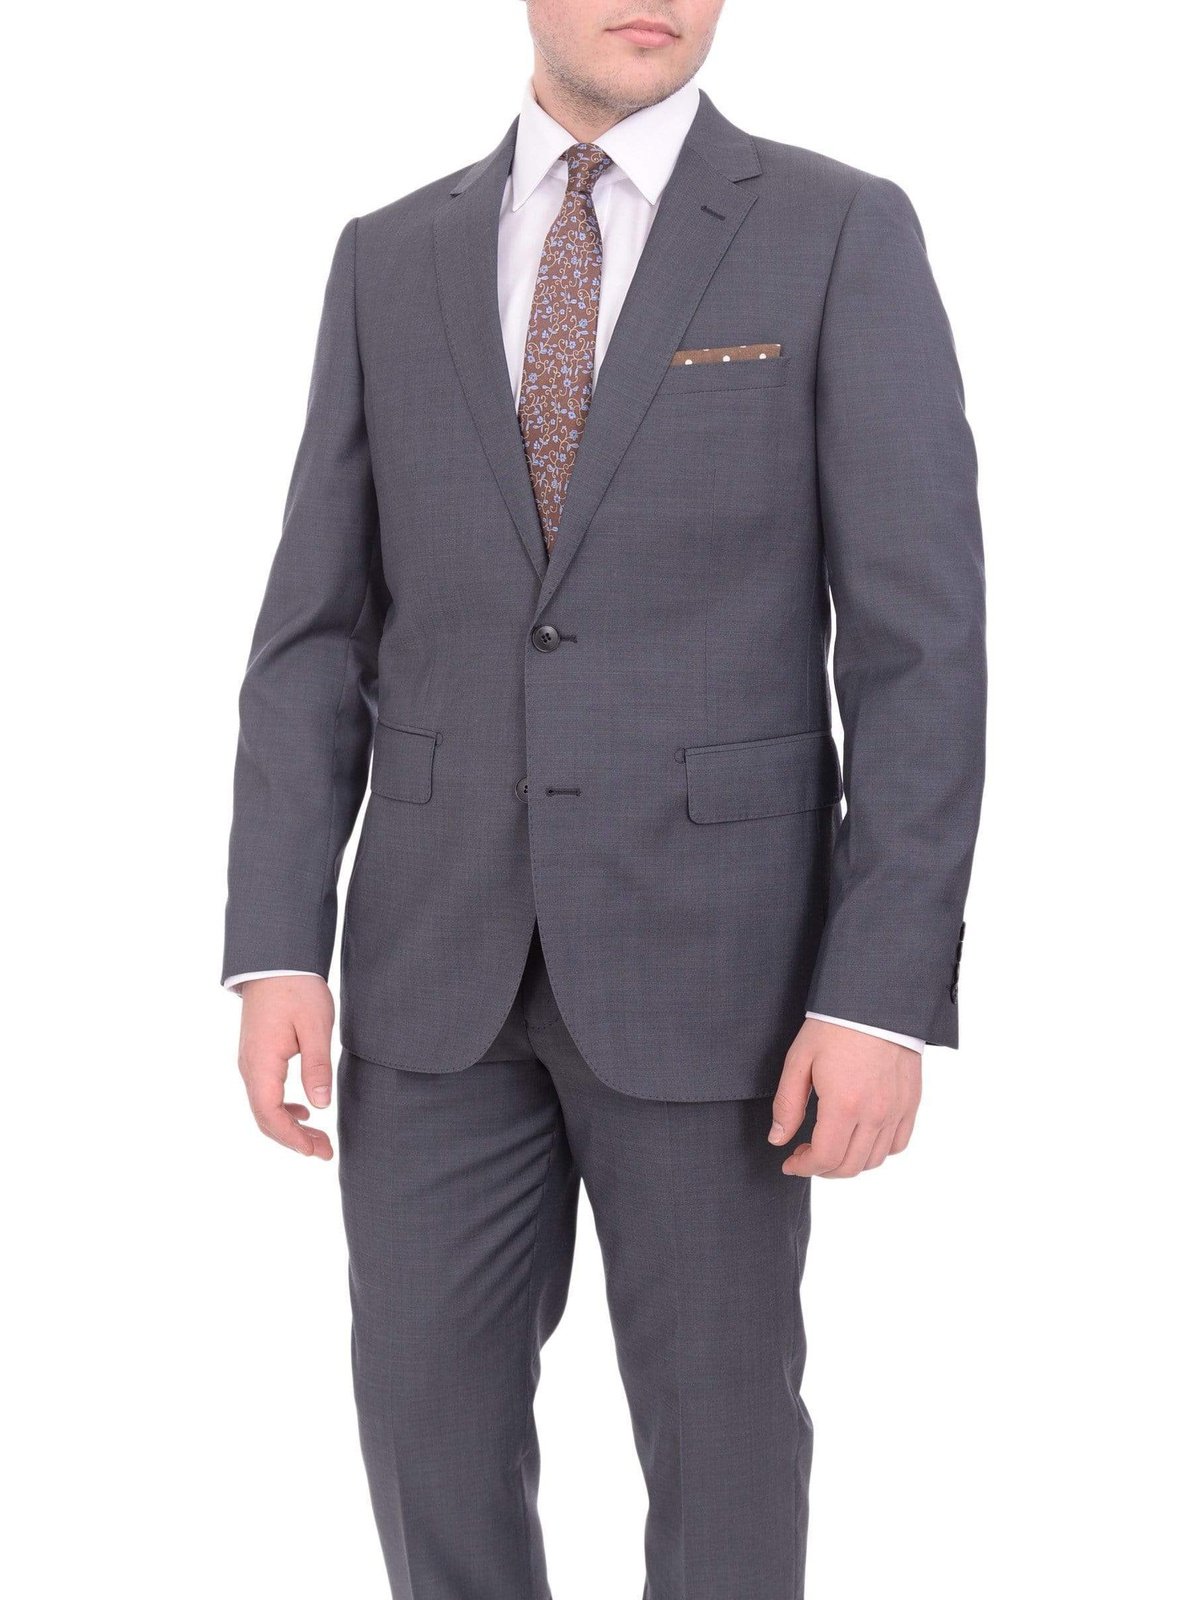 Label M TWO PIECE SUITS 46L Mens Modern Fit Heather Gray Two Button Wool Blend Suit